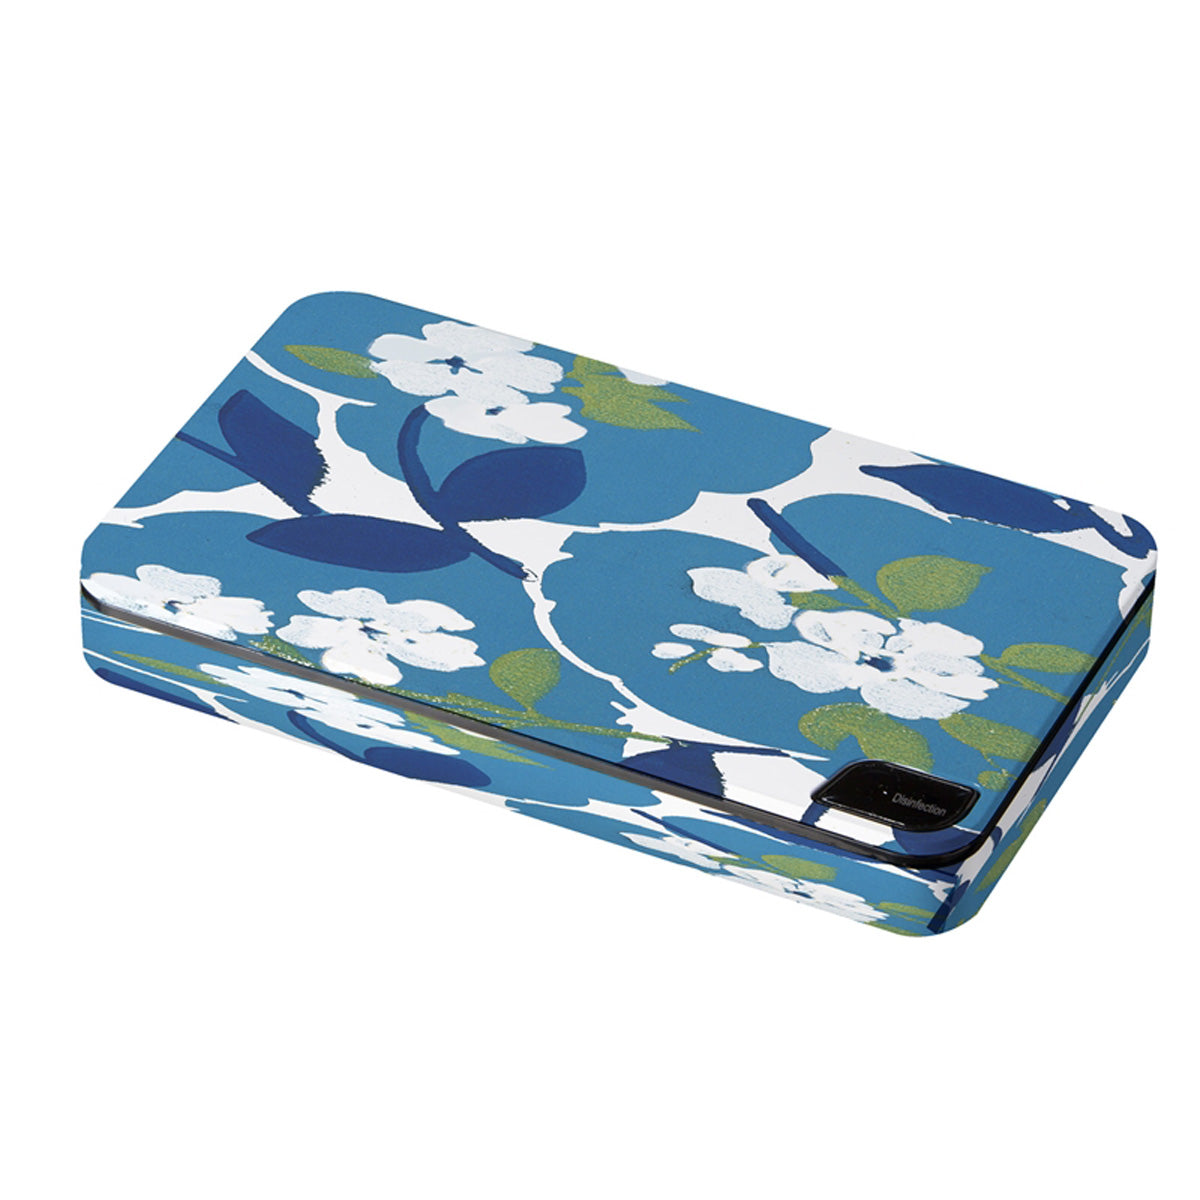 UVC Light Sanitizer and Phone Charging Case, Blue Floral